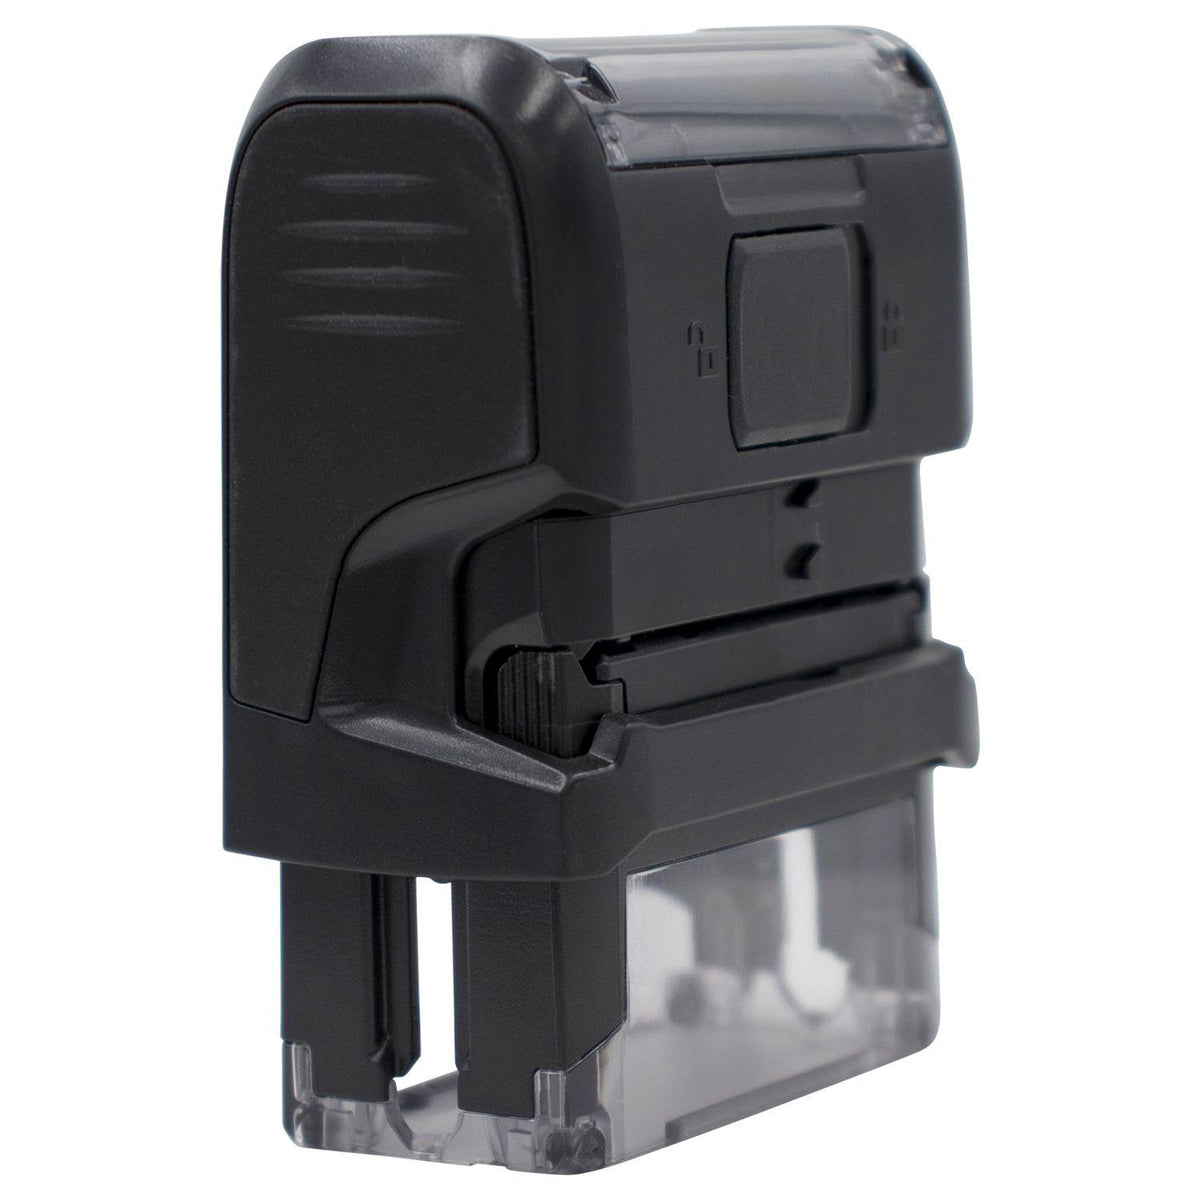 Self-Inking Asymptomatic Stamp - Engineer Seal Stamps - Brand_Trodat, Impression Size_Small, Stamp Type_Self-Inking Stamp, Type of Use_Medical Office